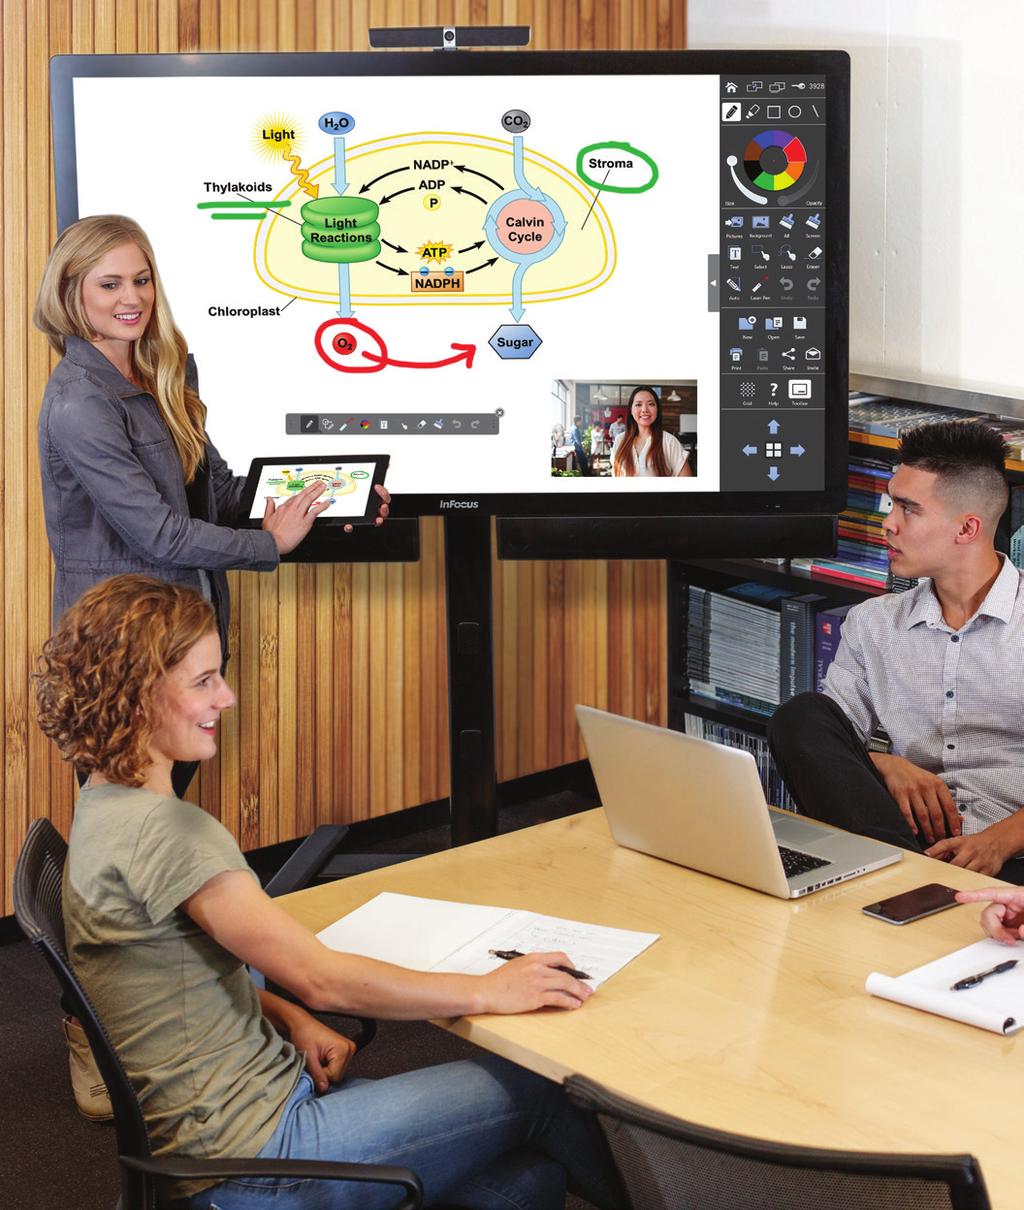 Mondopad Mondopad brings bright, engaging touch capabilities to digital curriculum, and fosters collaboration and creativity with video conferencing, an interactive whiteboard and wireless content